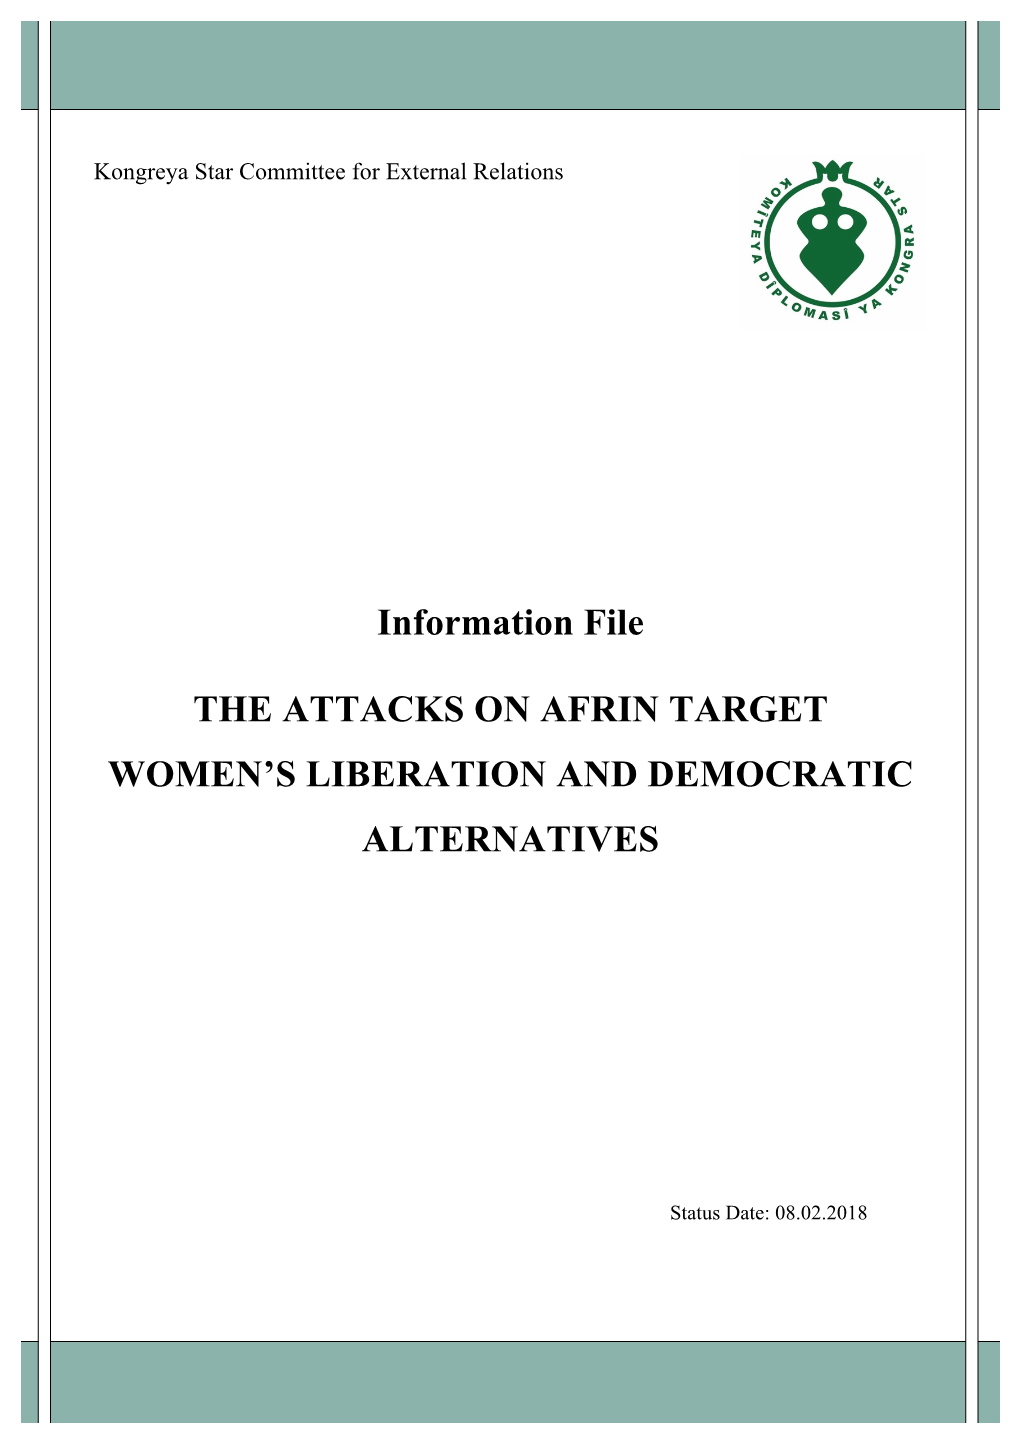 Information File the ATTACKS on AFRIN TARGET WOMEN's